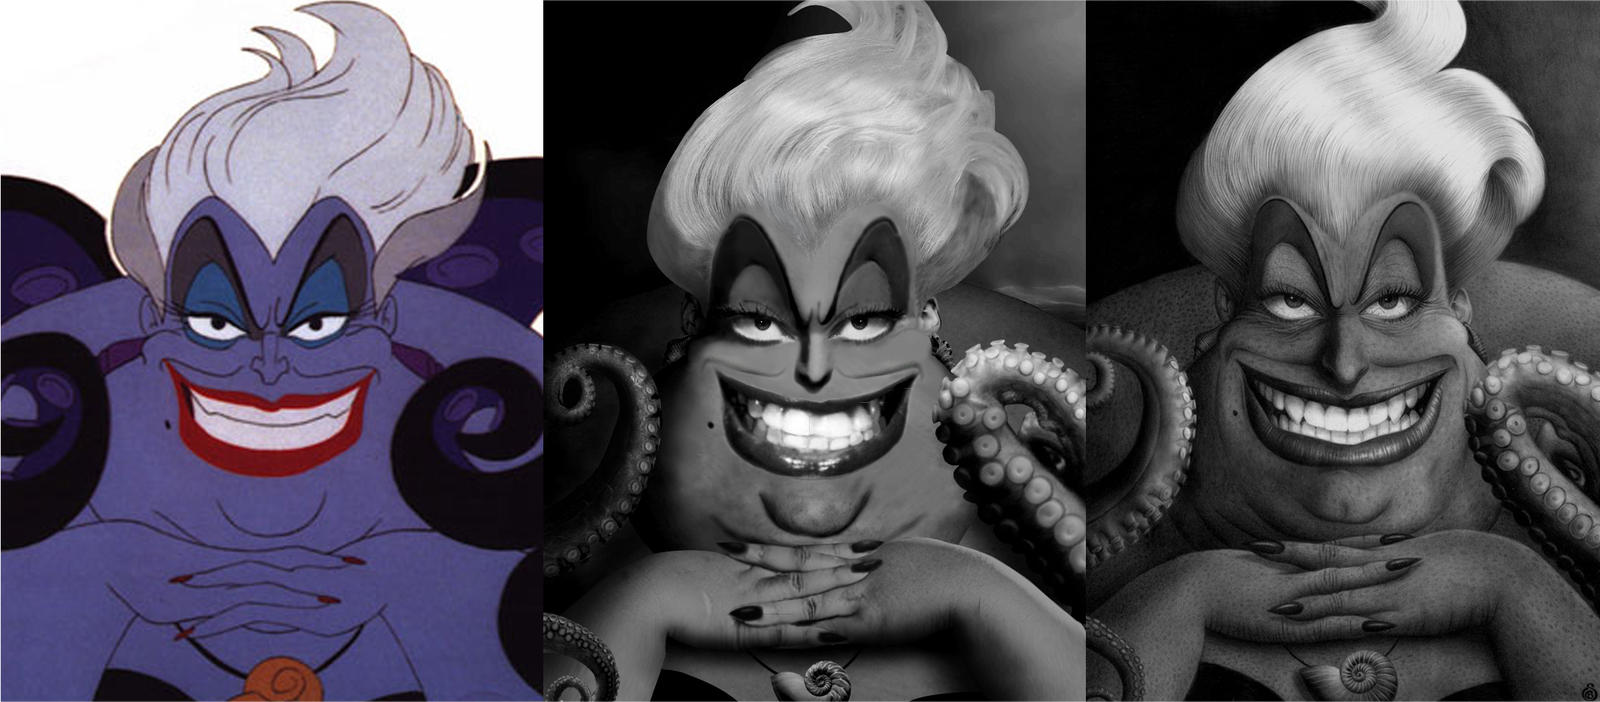 Ursula - From the movie to the drawing